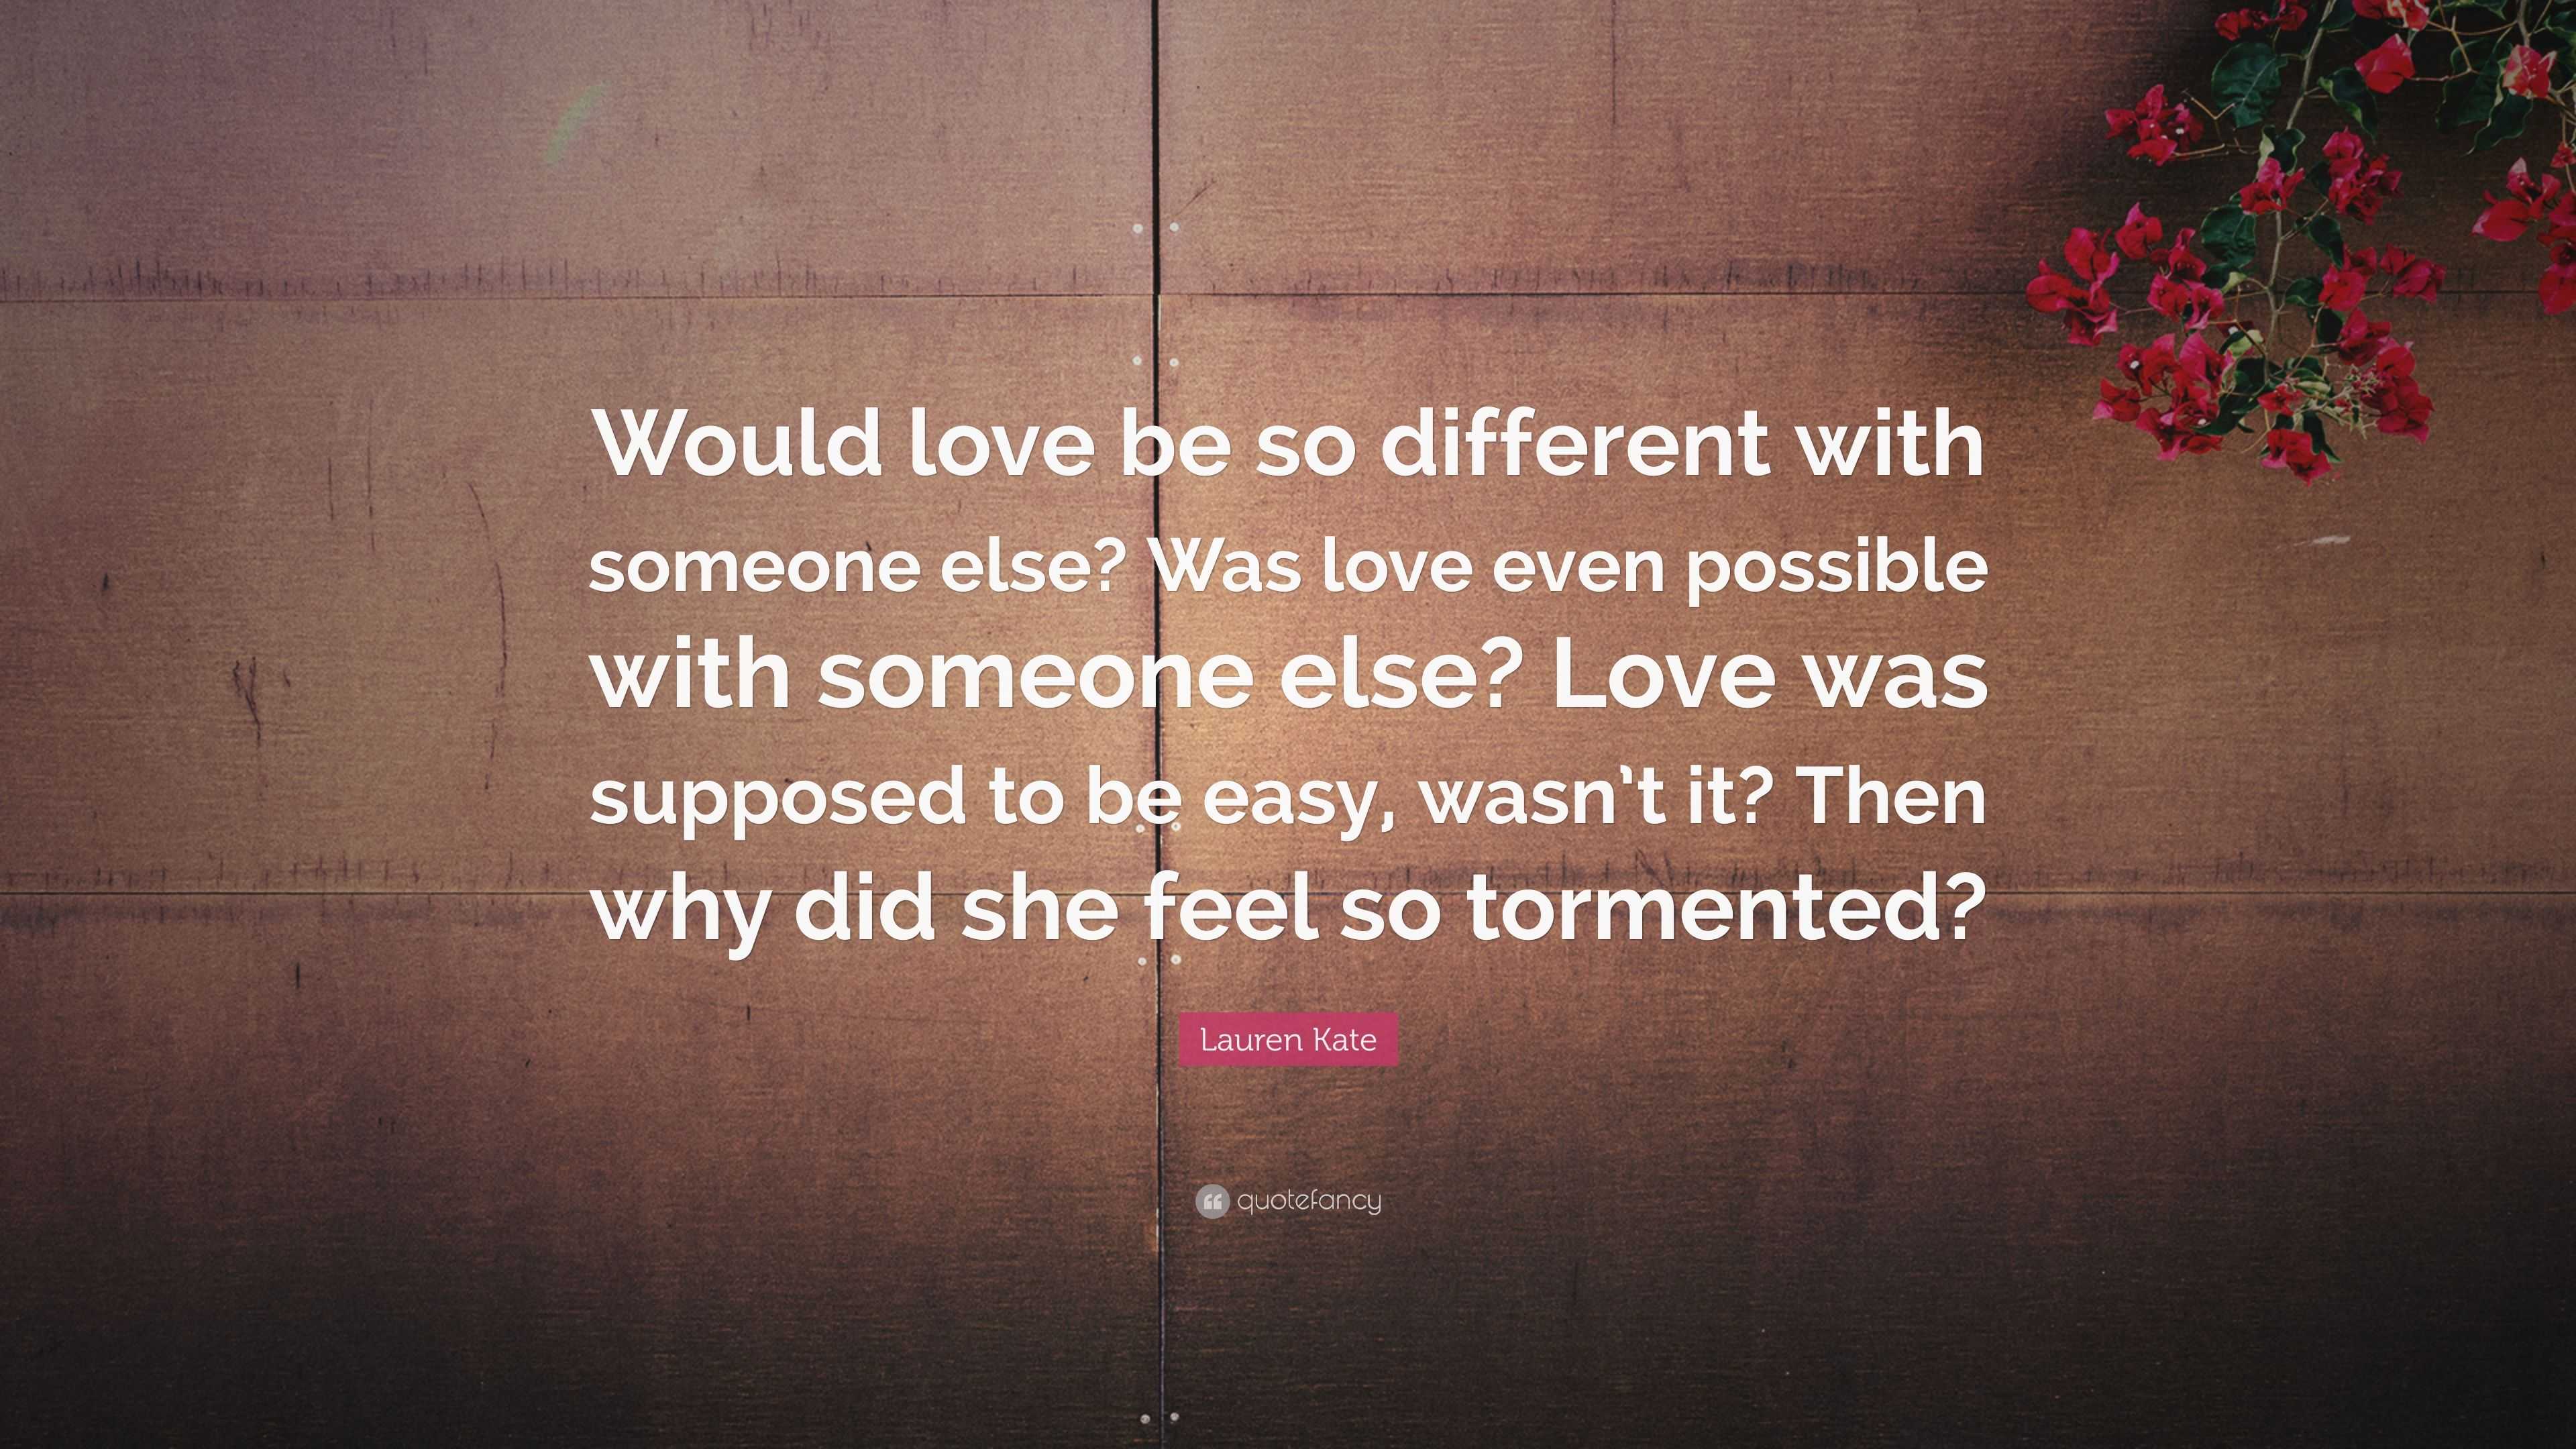 Lauren Kate Quote “Would love be so different with someone else Was love